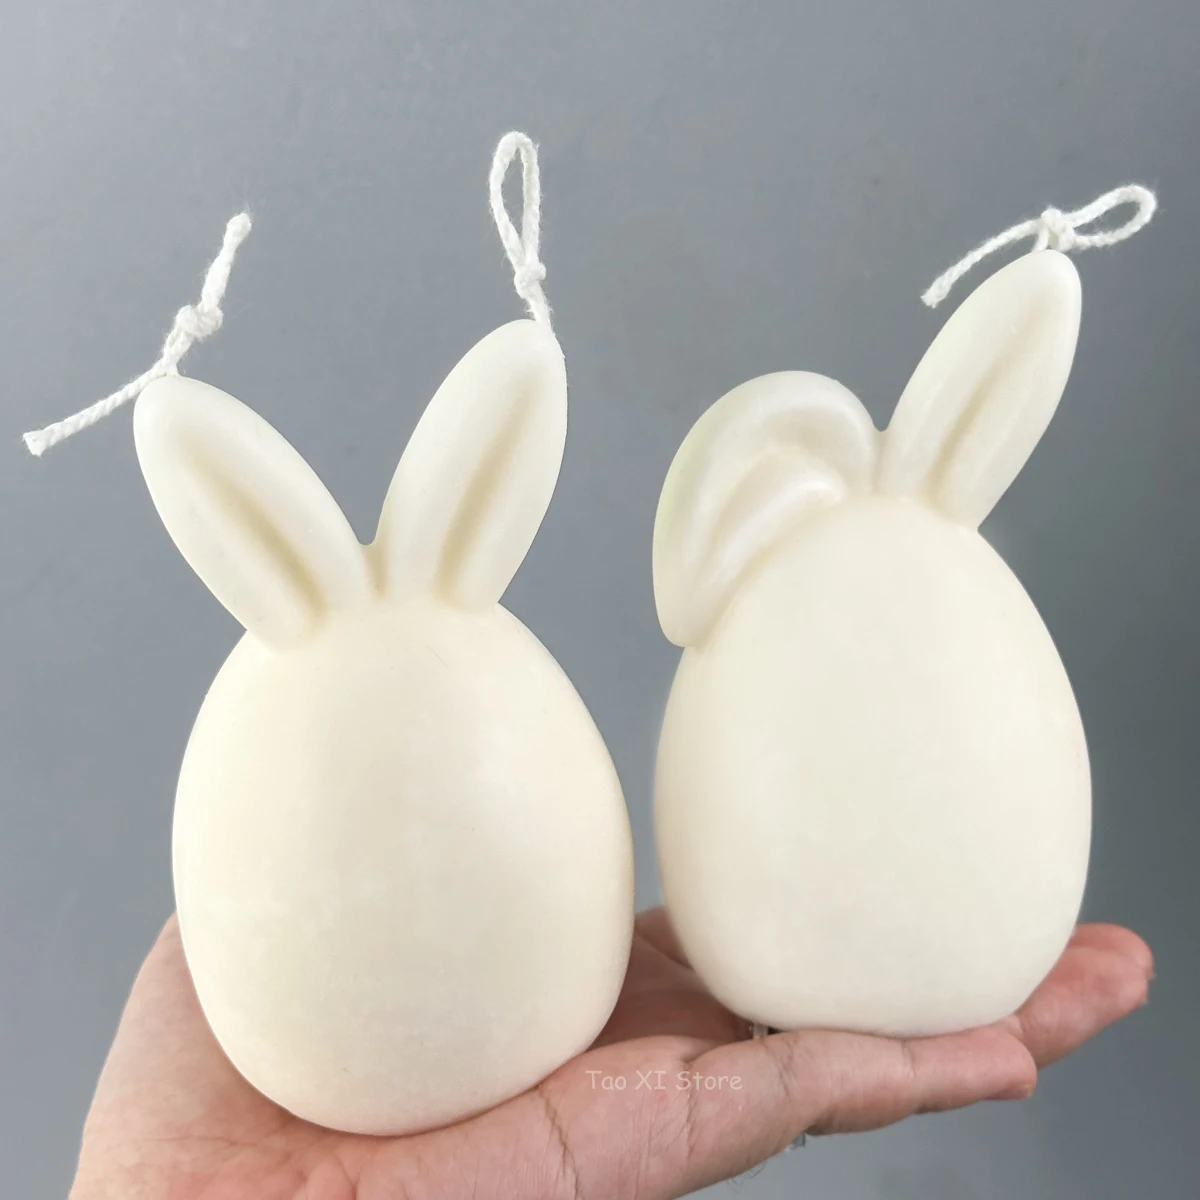 3D Cute Rabbit Silicone Candle Mold DIY Easter Ornament Round Egg Rabbit Craft Gift Making Soap Plaster Resin Molds Home Decor